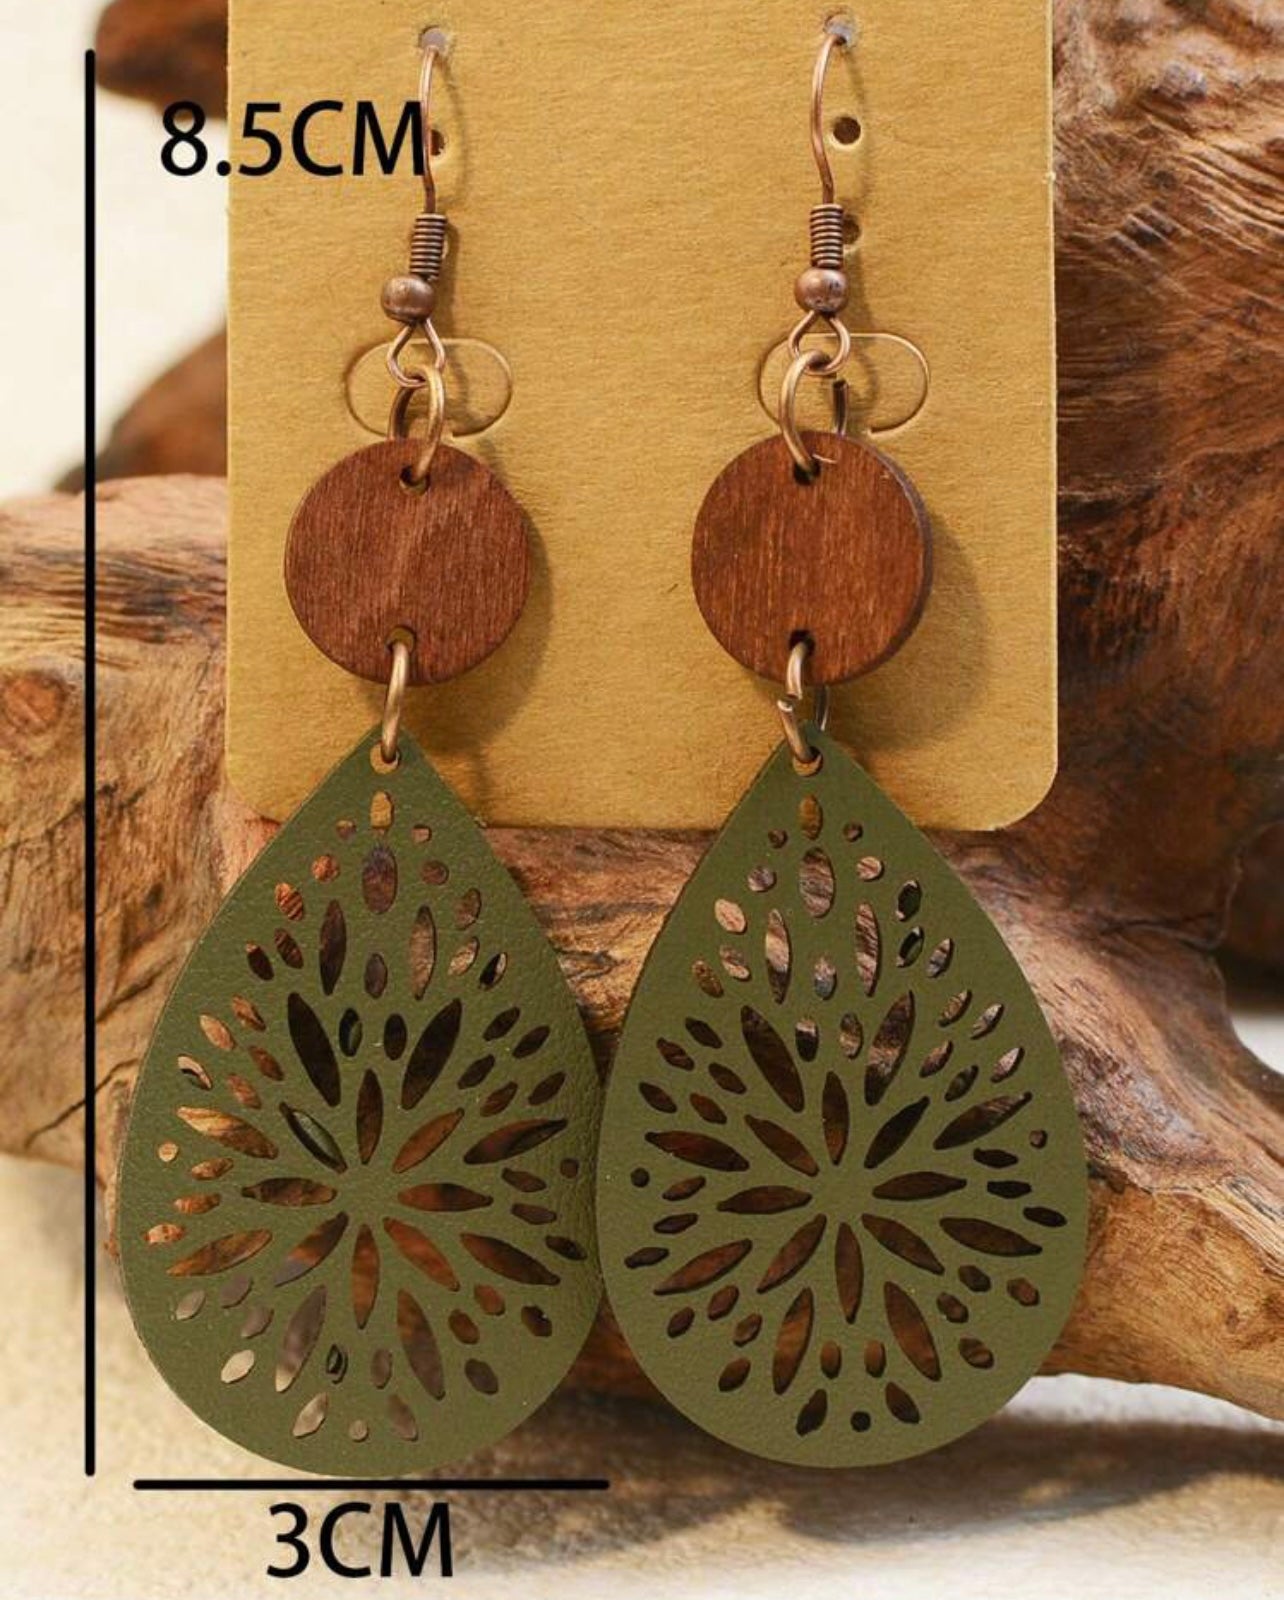 Beautiful Green Leather and Wood Earrings